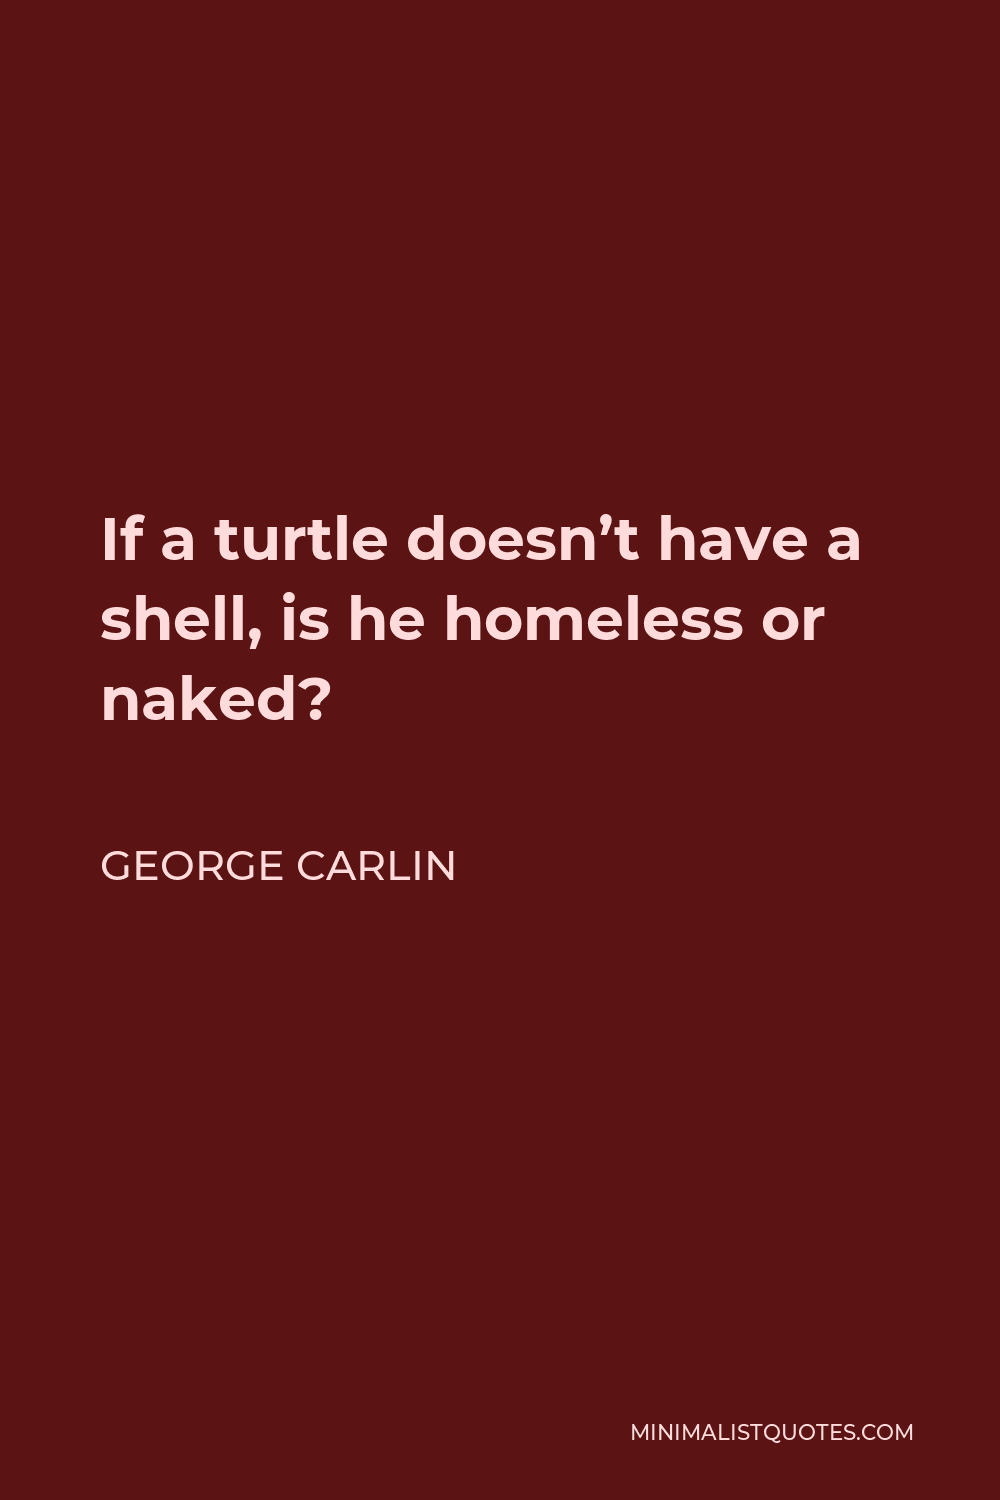 George Carlin Quote - If a turtle doesn’t have a shell, is he homeless or naked?